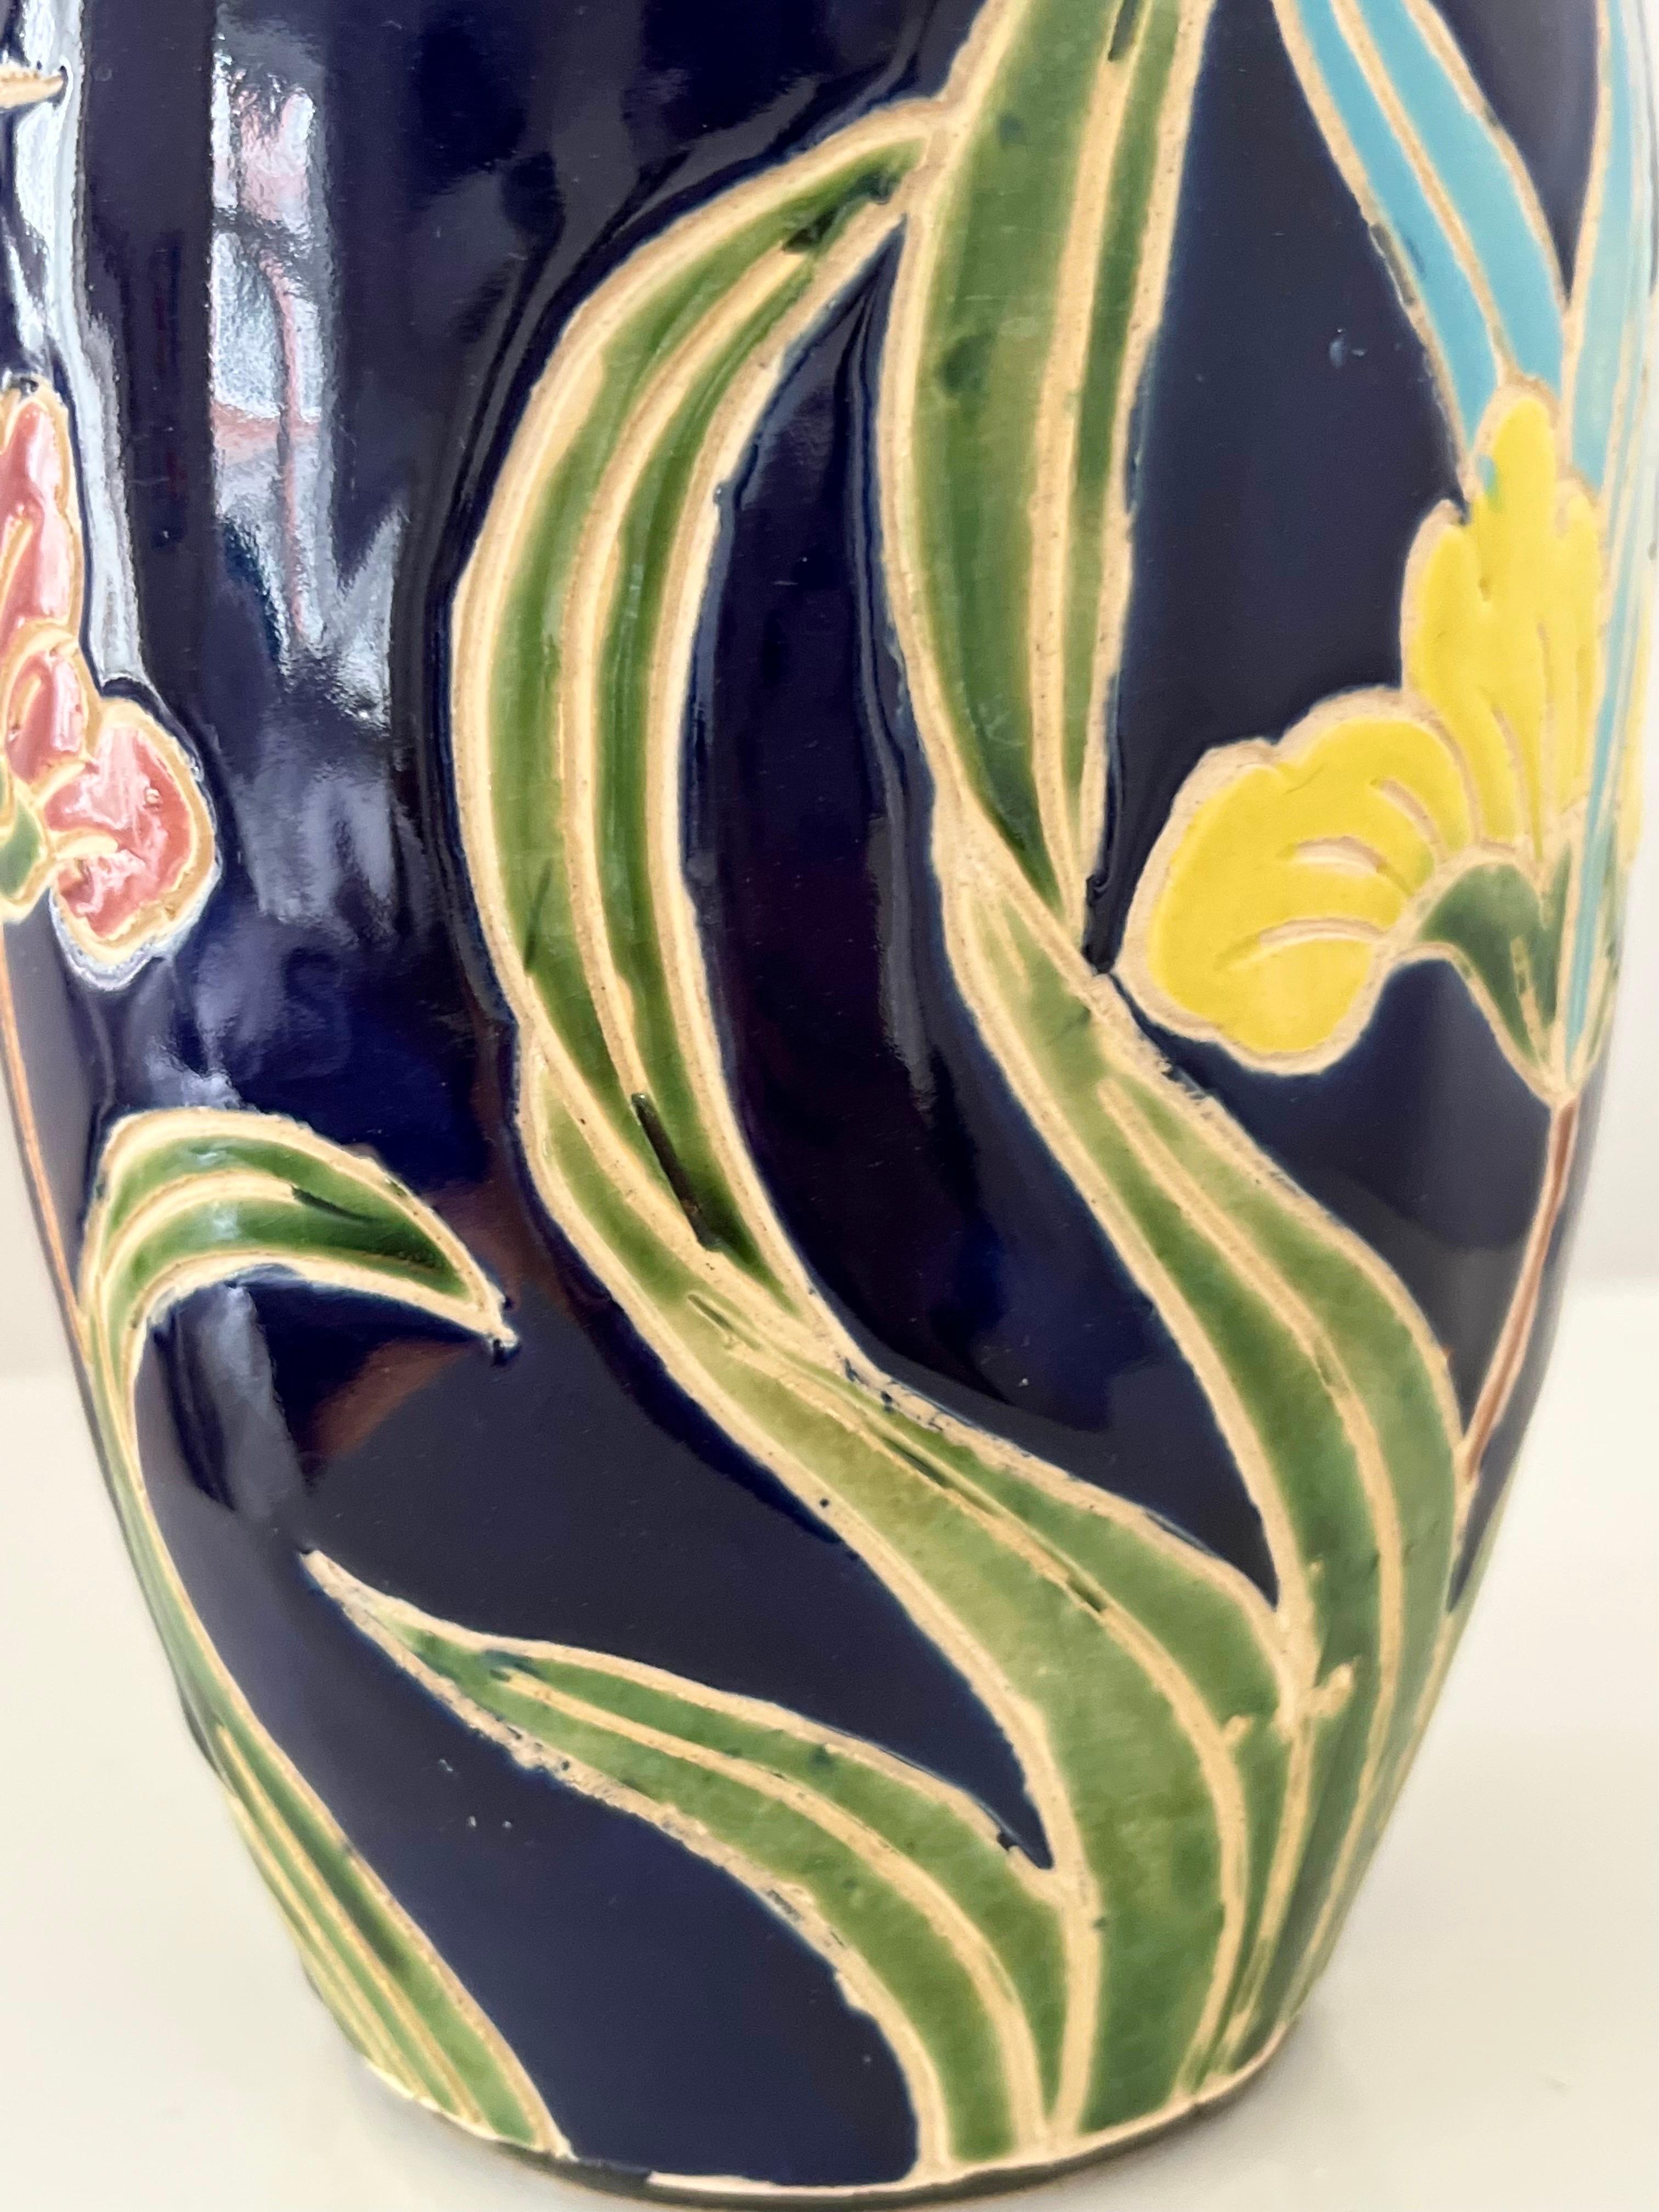 1960s/1970s Scandinavian Organic Modern Ceramic Vase with Colorful Floral Motifs For Sale 12